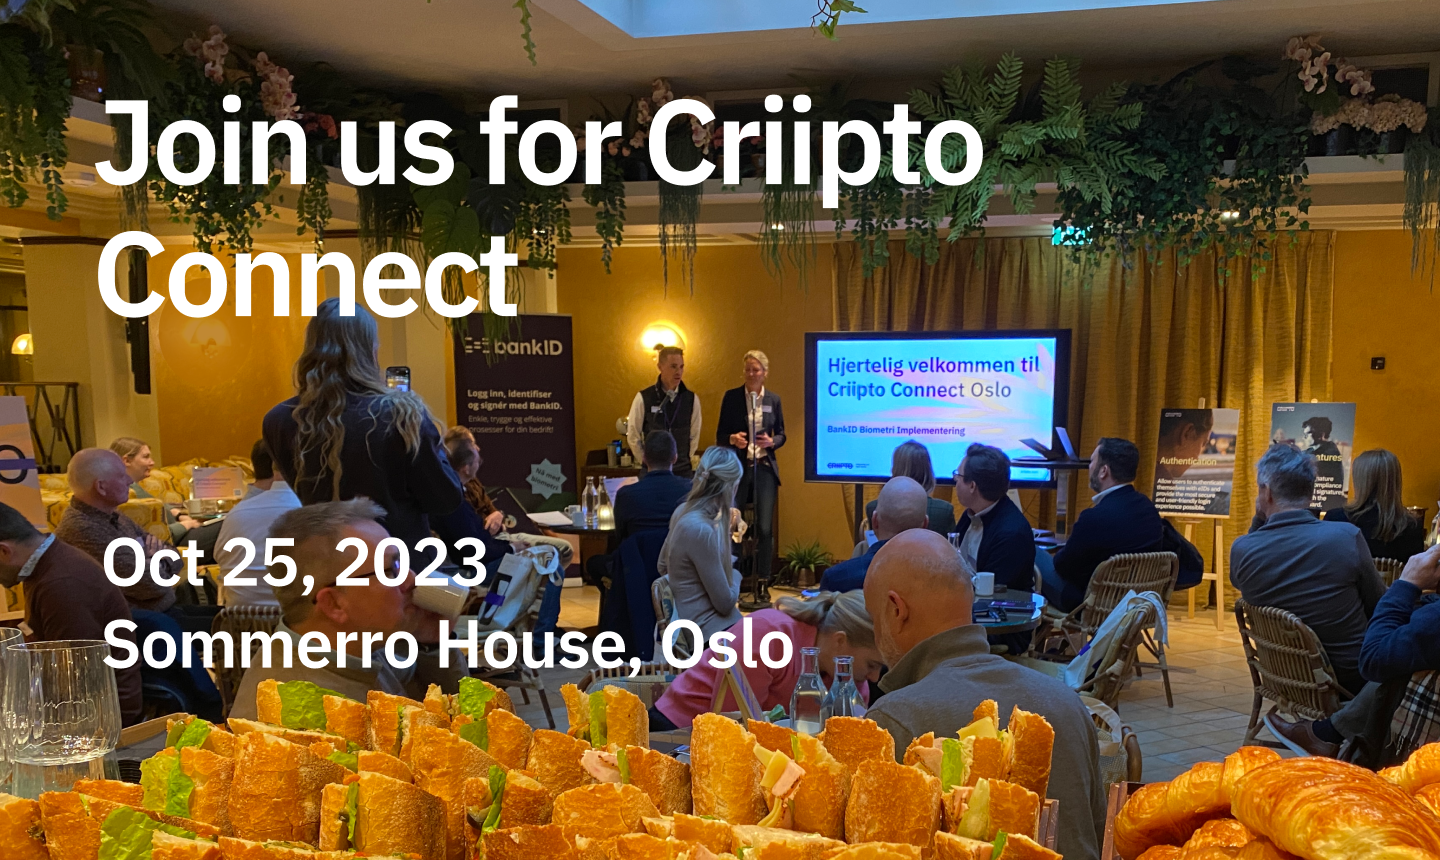 Join us for Criipto Connect - Oslo, October 25